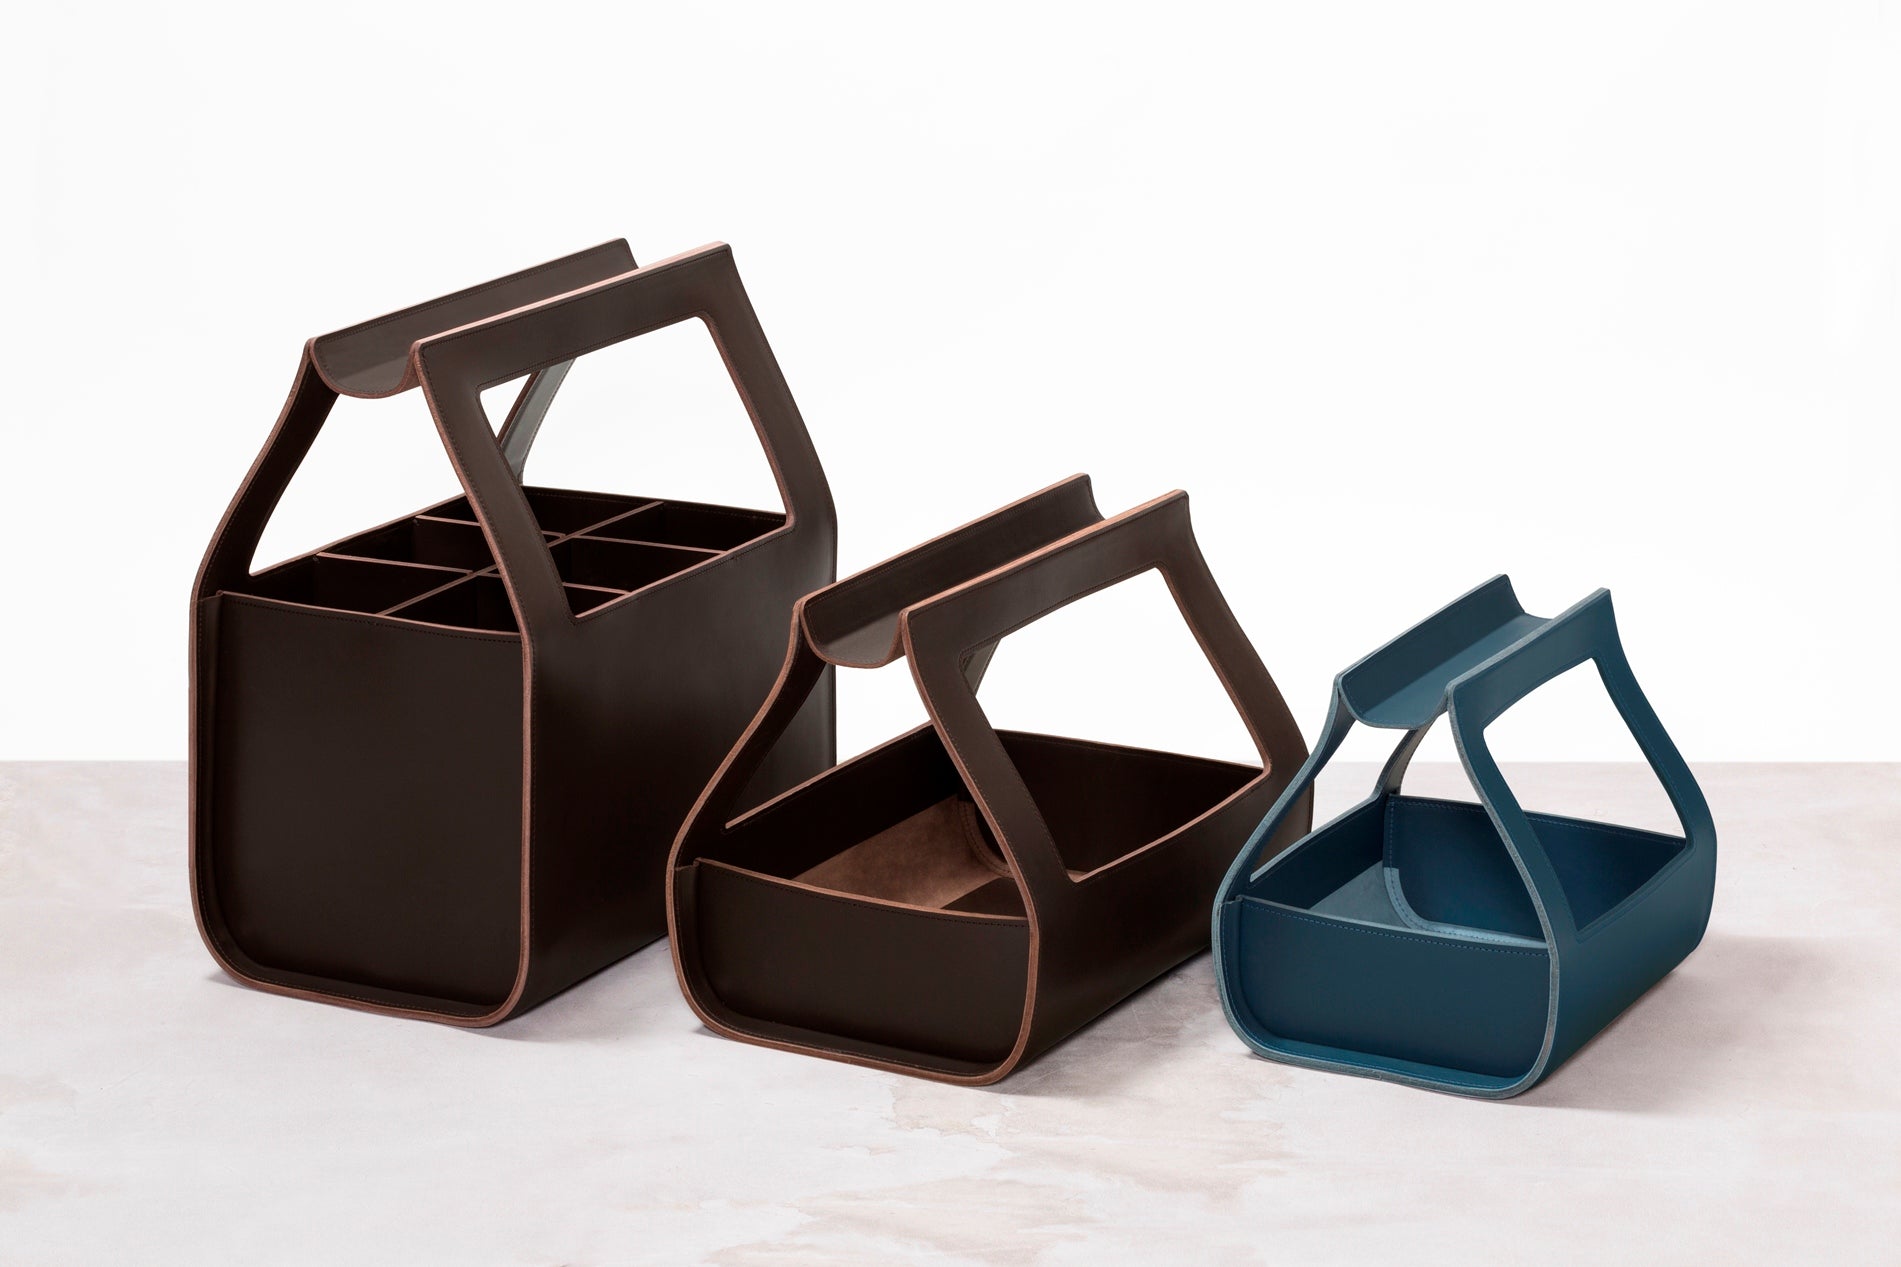 Rabitti 1969 Copenhagen Saddle Leather Storage Basket With Dividers | Elegant and Functional Storage Solution | Crafted with High-Quality Saddle Leather | Dividers for Enhanced Organization | Explore a Range of Luxury Home Accessories at 2Jour Concierge, #1 luxury high-end gift & lifestyle shop